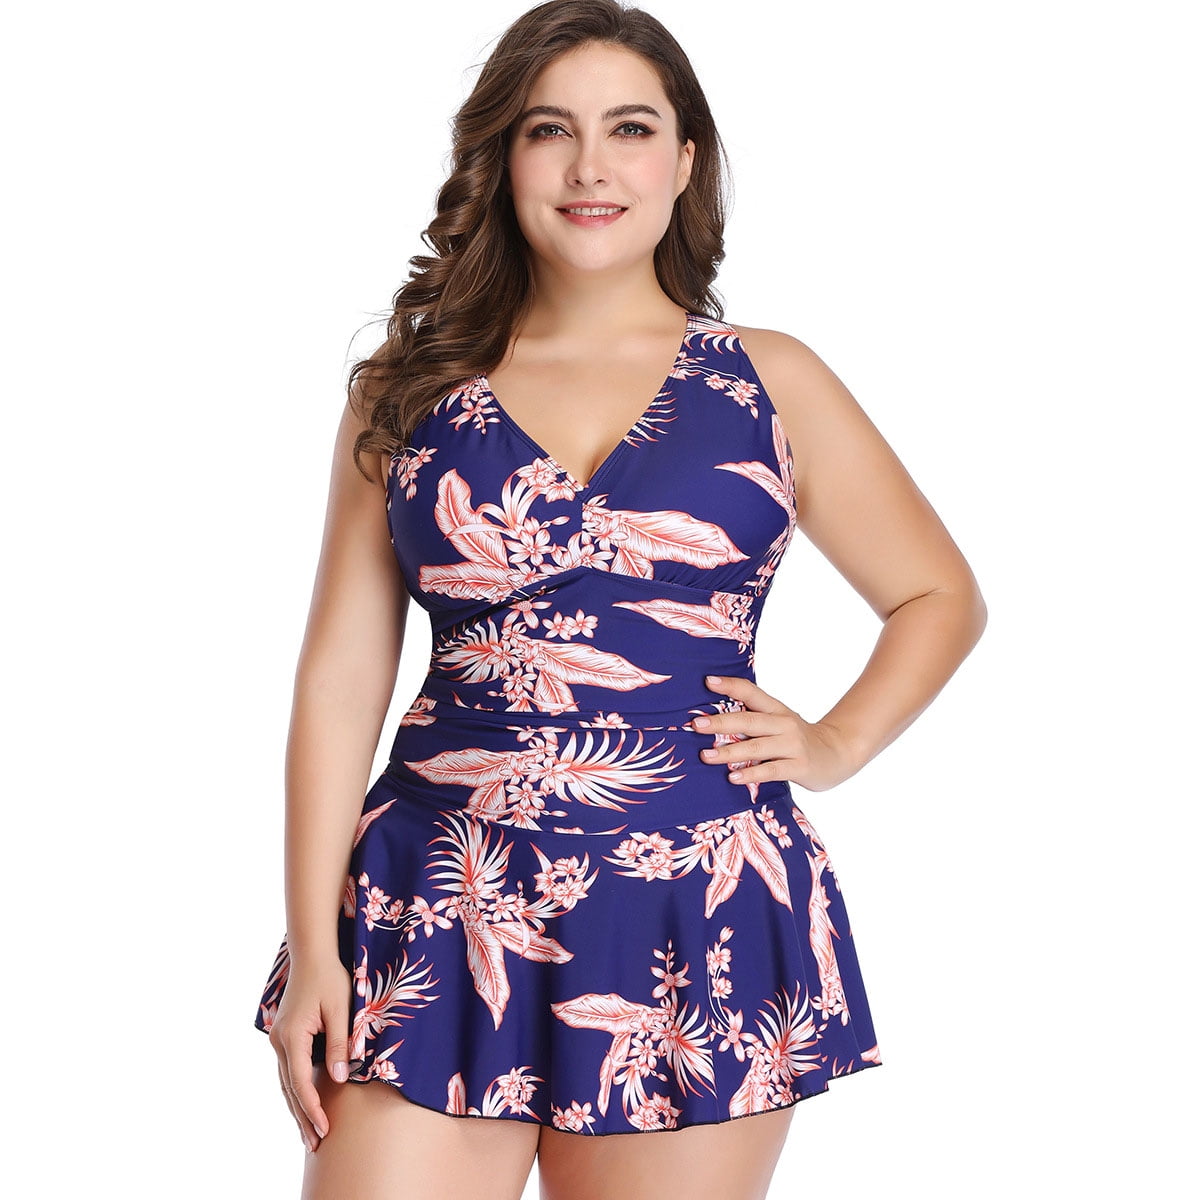 ECUPPER Womens One Piece Swimsuit Plus Size Swimwear Floral Printed Swimming Costume with Skirt